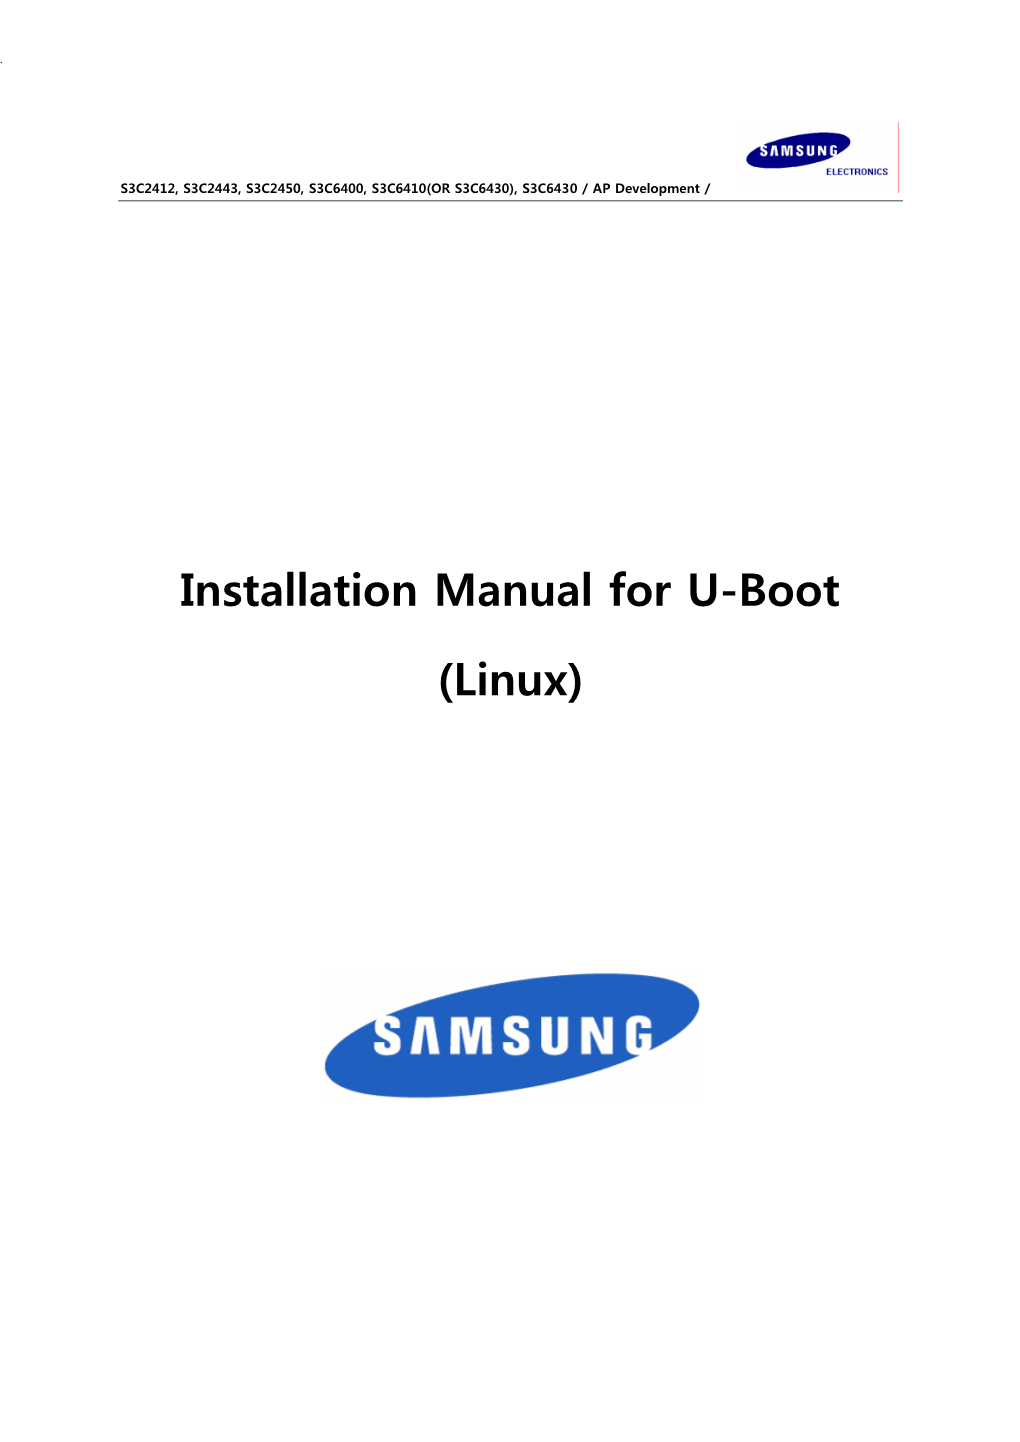 Installation Manual for U-Boot (Linux)